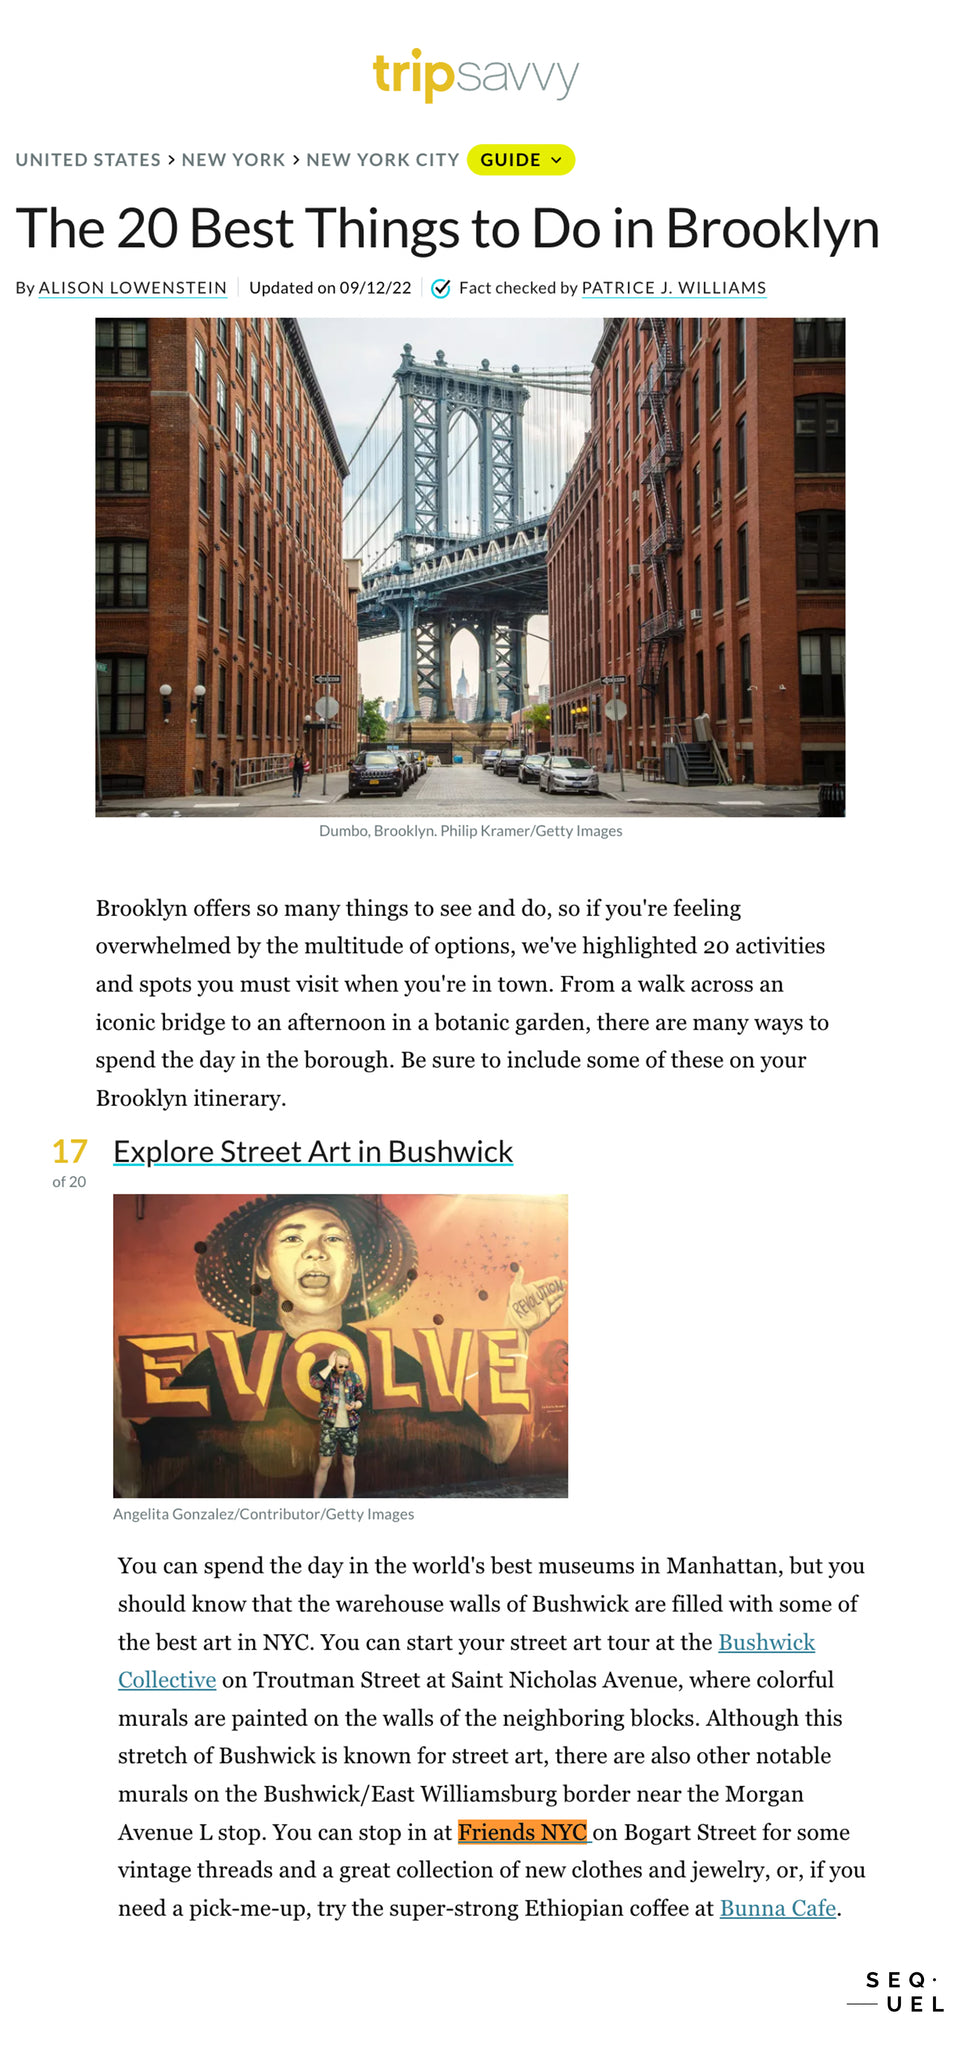 Trip Savvy The 20 Best Things to Do in Brooklyn